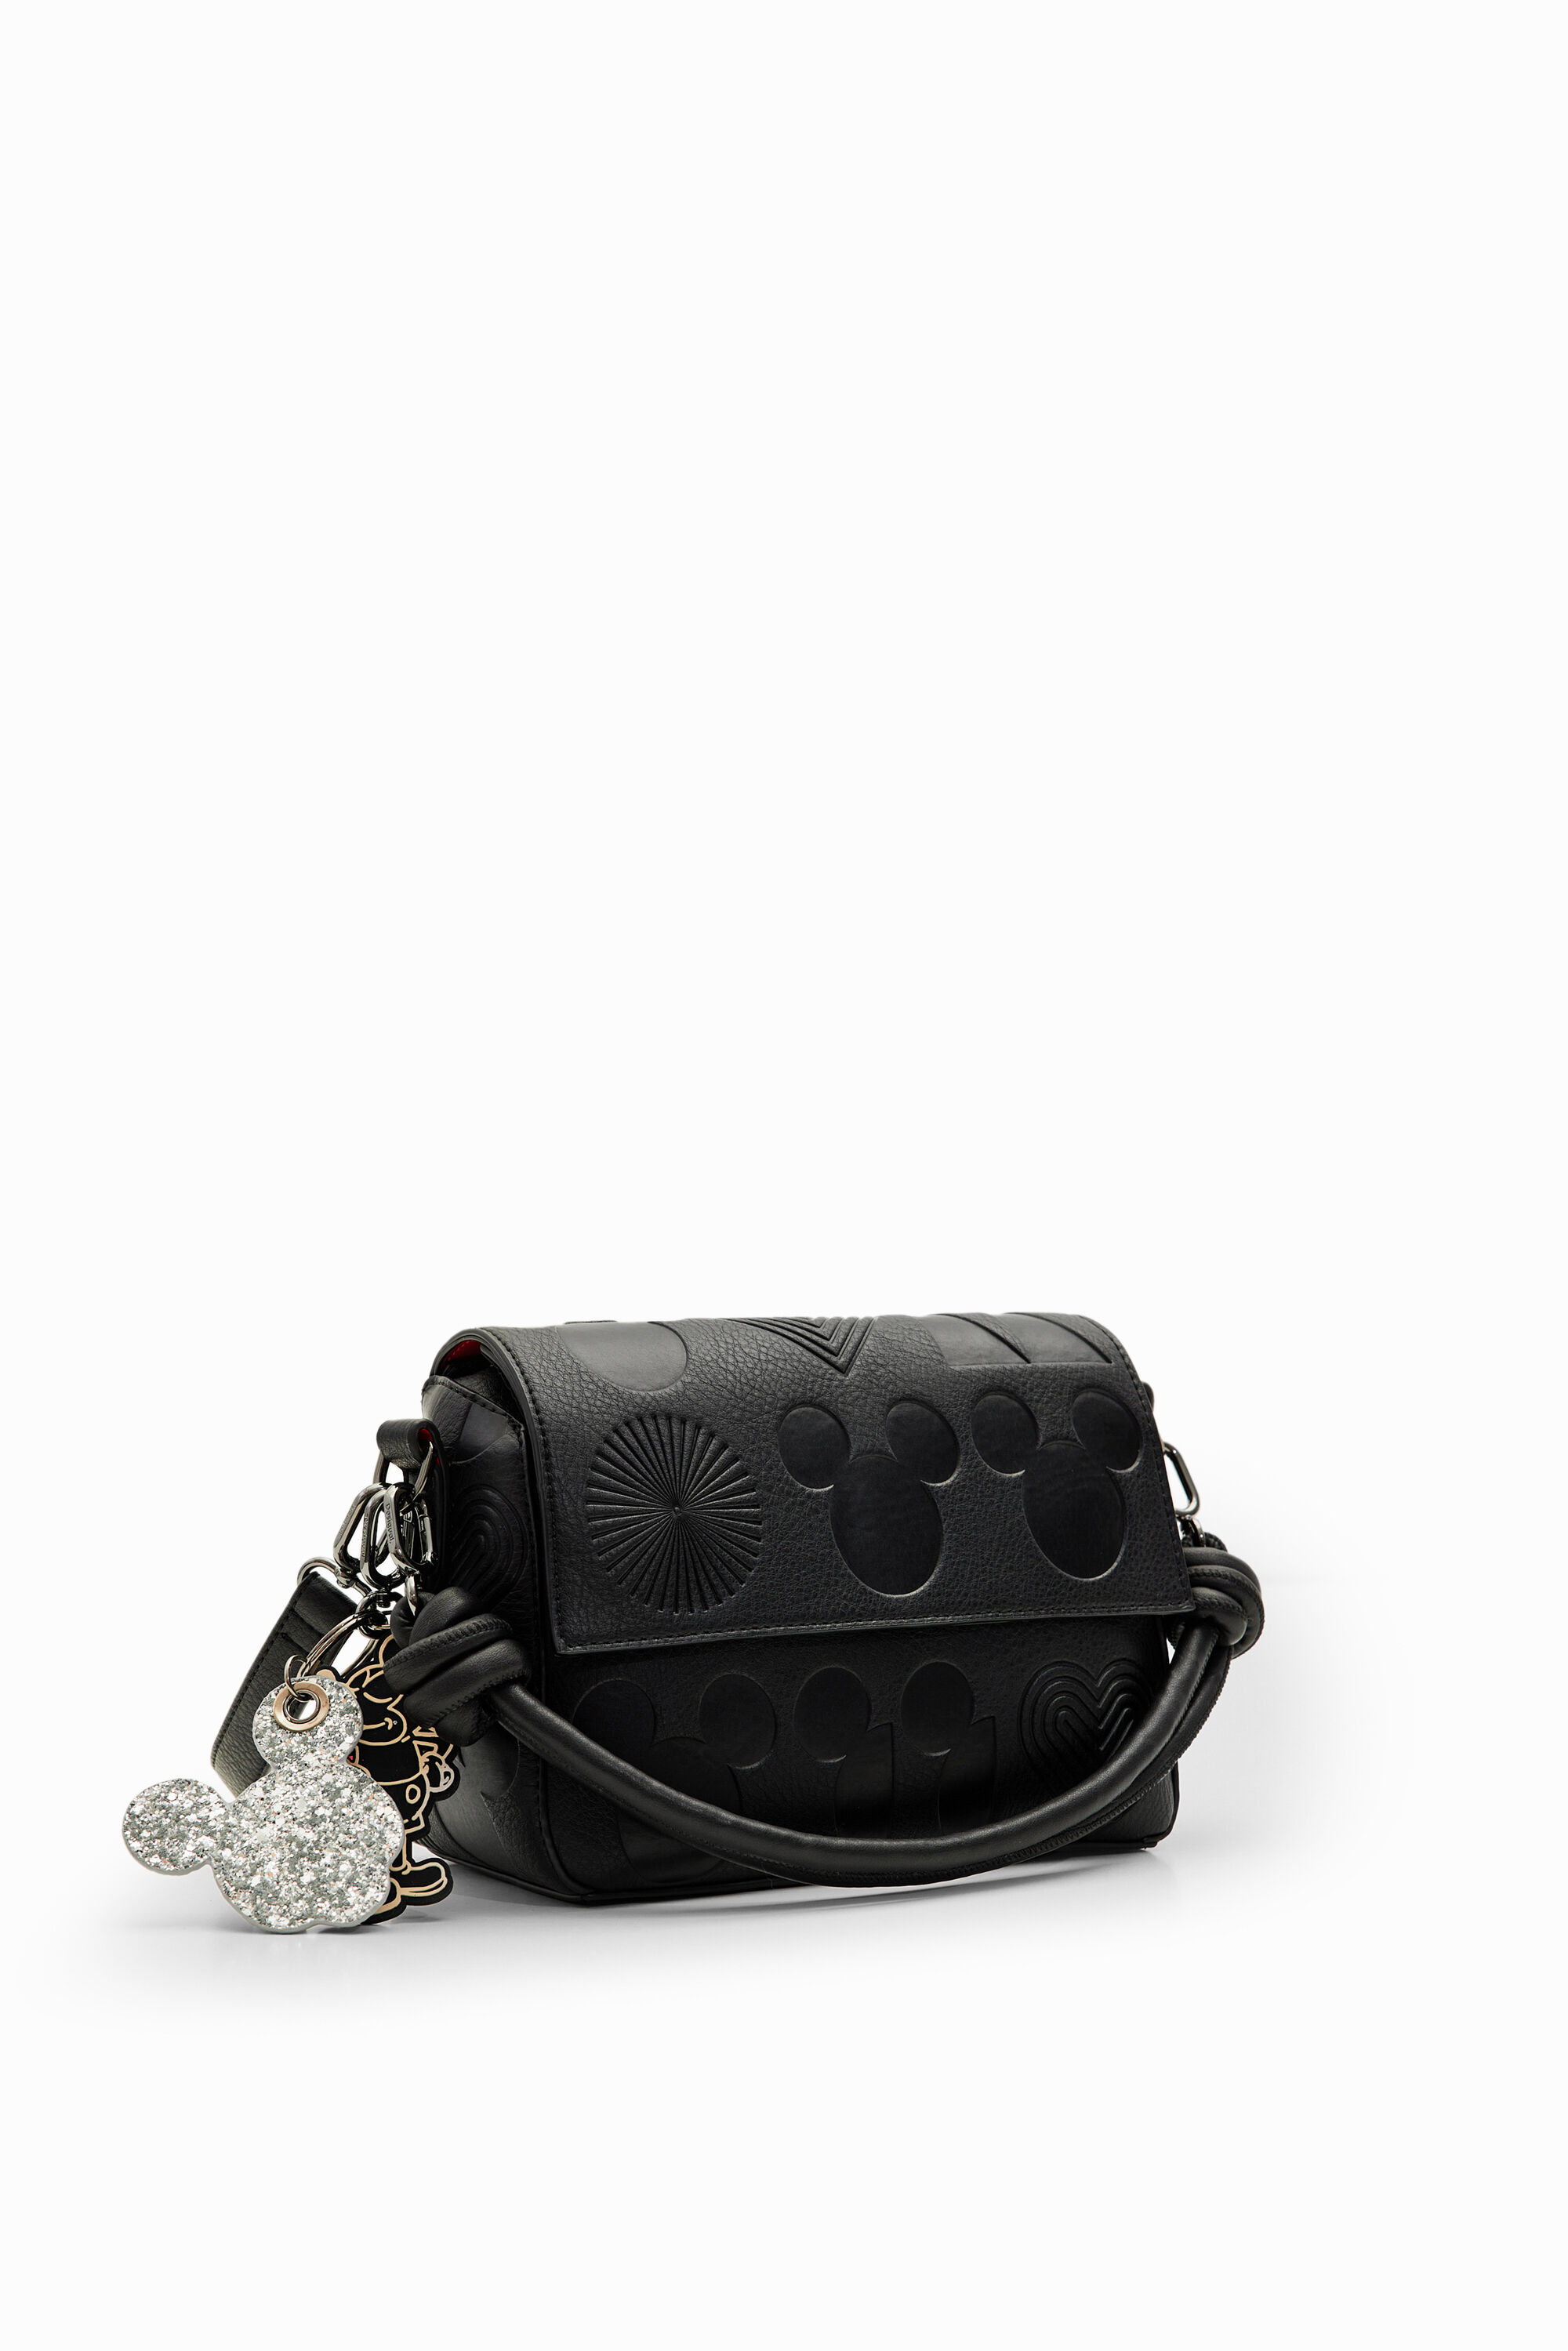 Desigual S Mickey Mouse Bag In Black